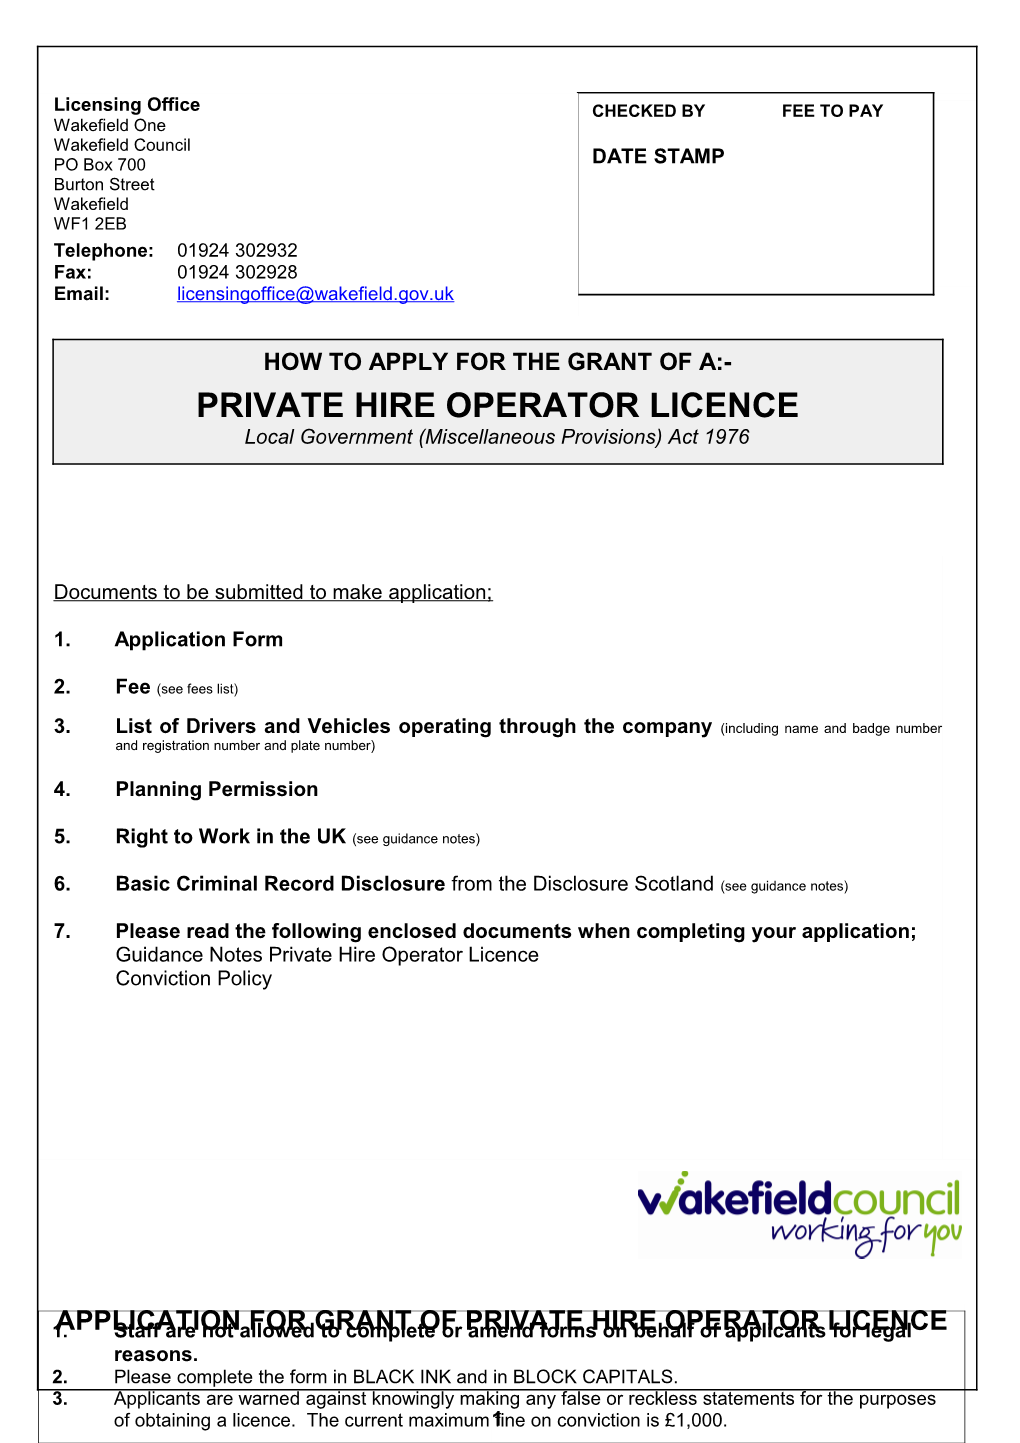 Private Hire Vehicle Operators Licence Application Form